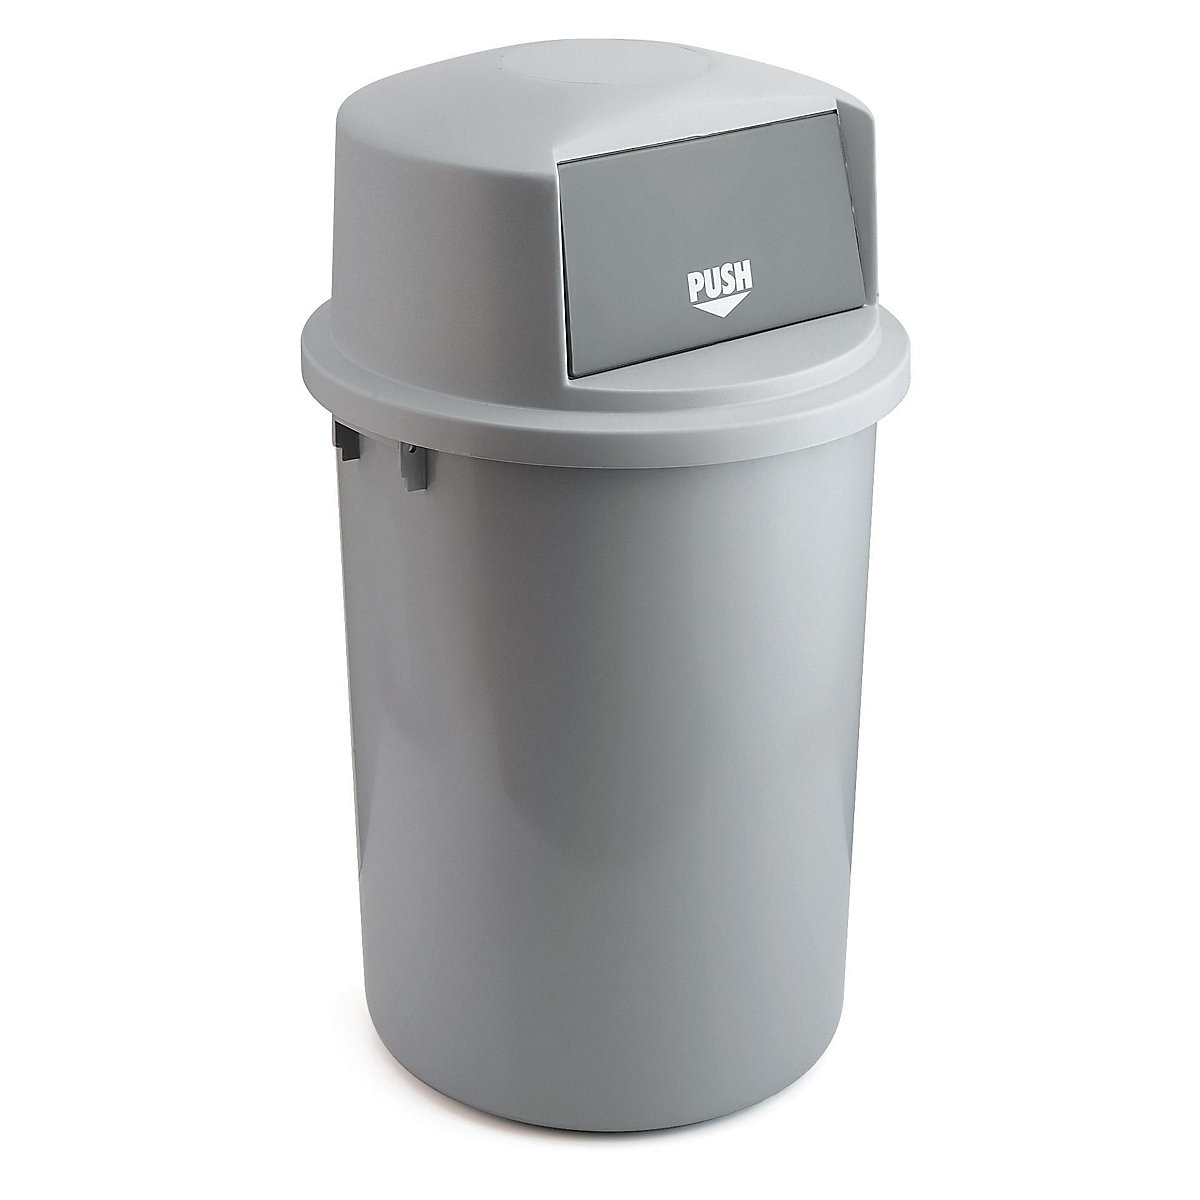 Push waste collector for outdoor areas